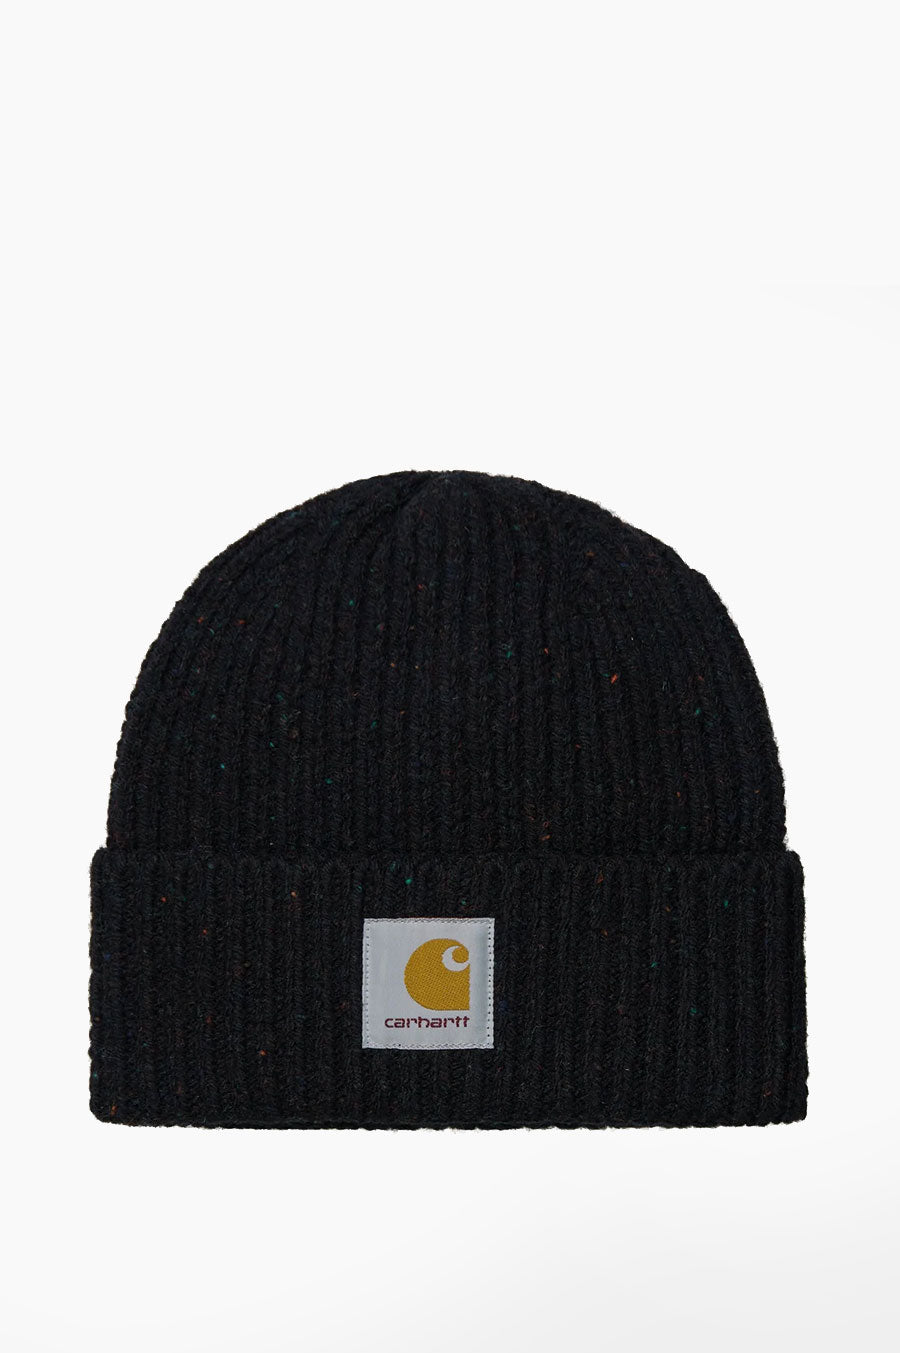 CARHARTT WIP ANGLISTIC BEANIE SPECKLED BLACK